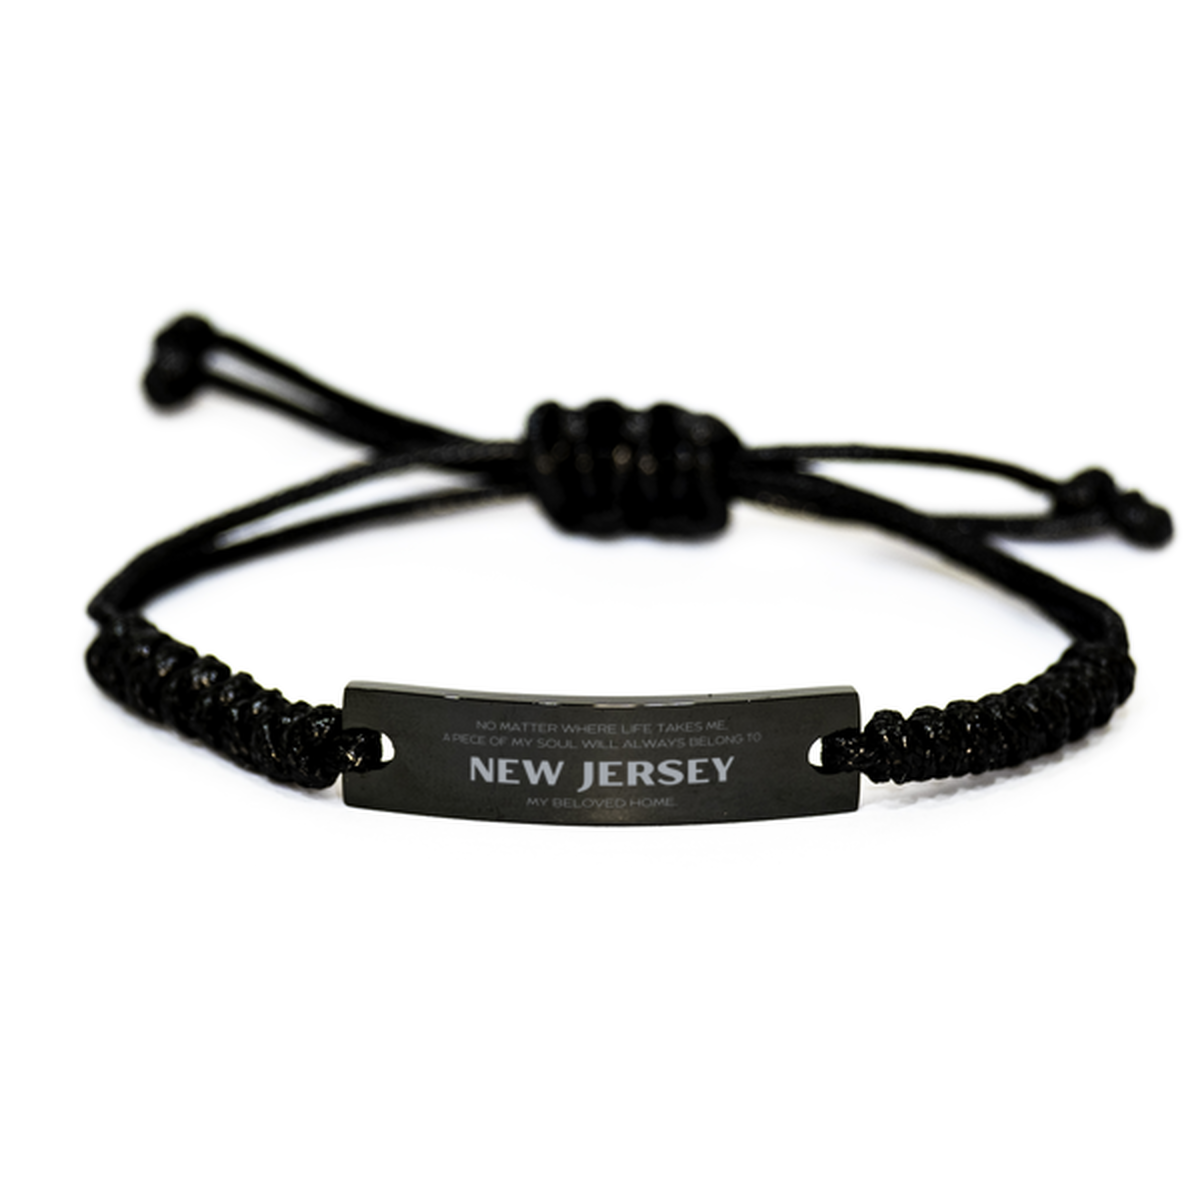 Love New Jersey State Gifts, My soul will always belong to New Jersey, Proud Black Rope Bracelet, Birthday Unique Gifts For New Jersey Men, Women, Friends